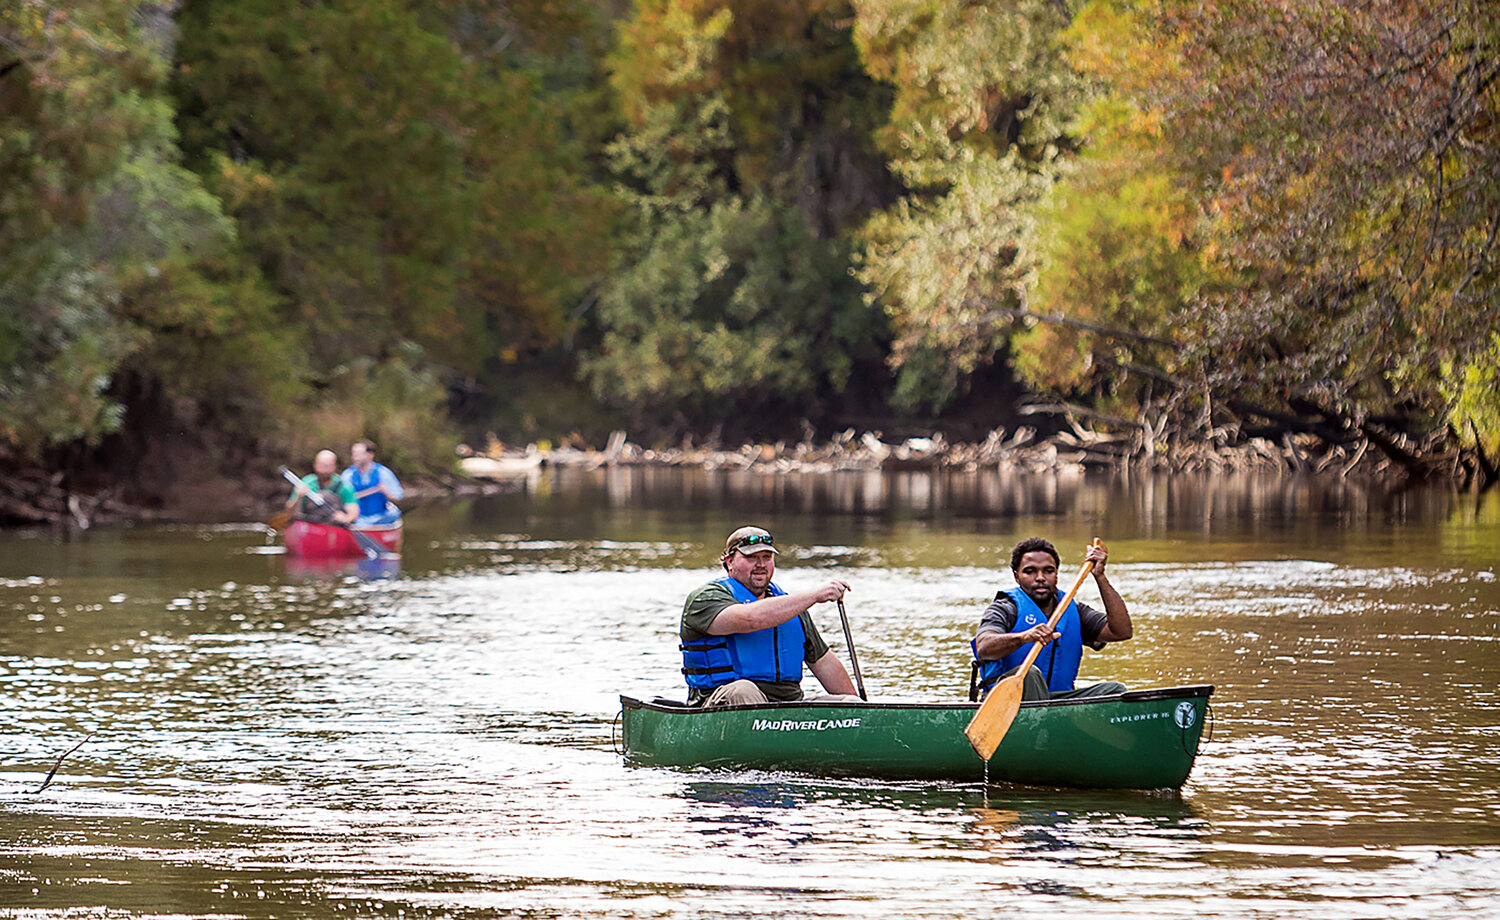 The Perdido River on the Alabama Gulf Coast provides multiple outdoor recreational opportunities.